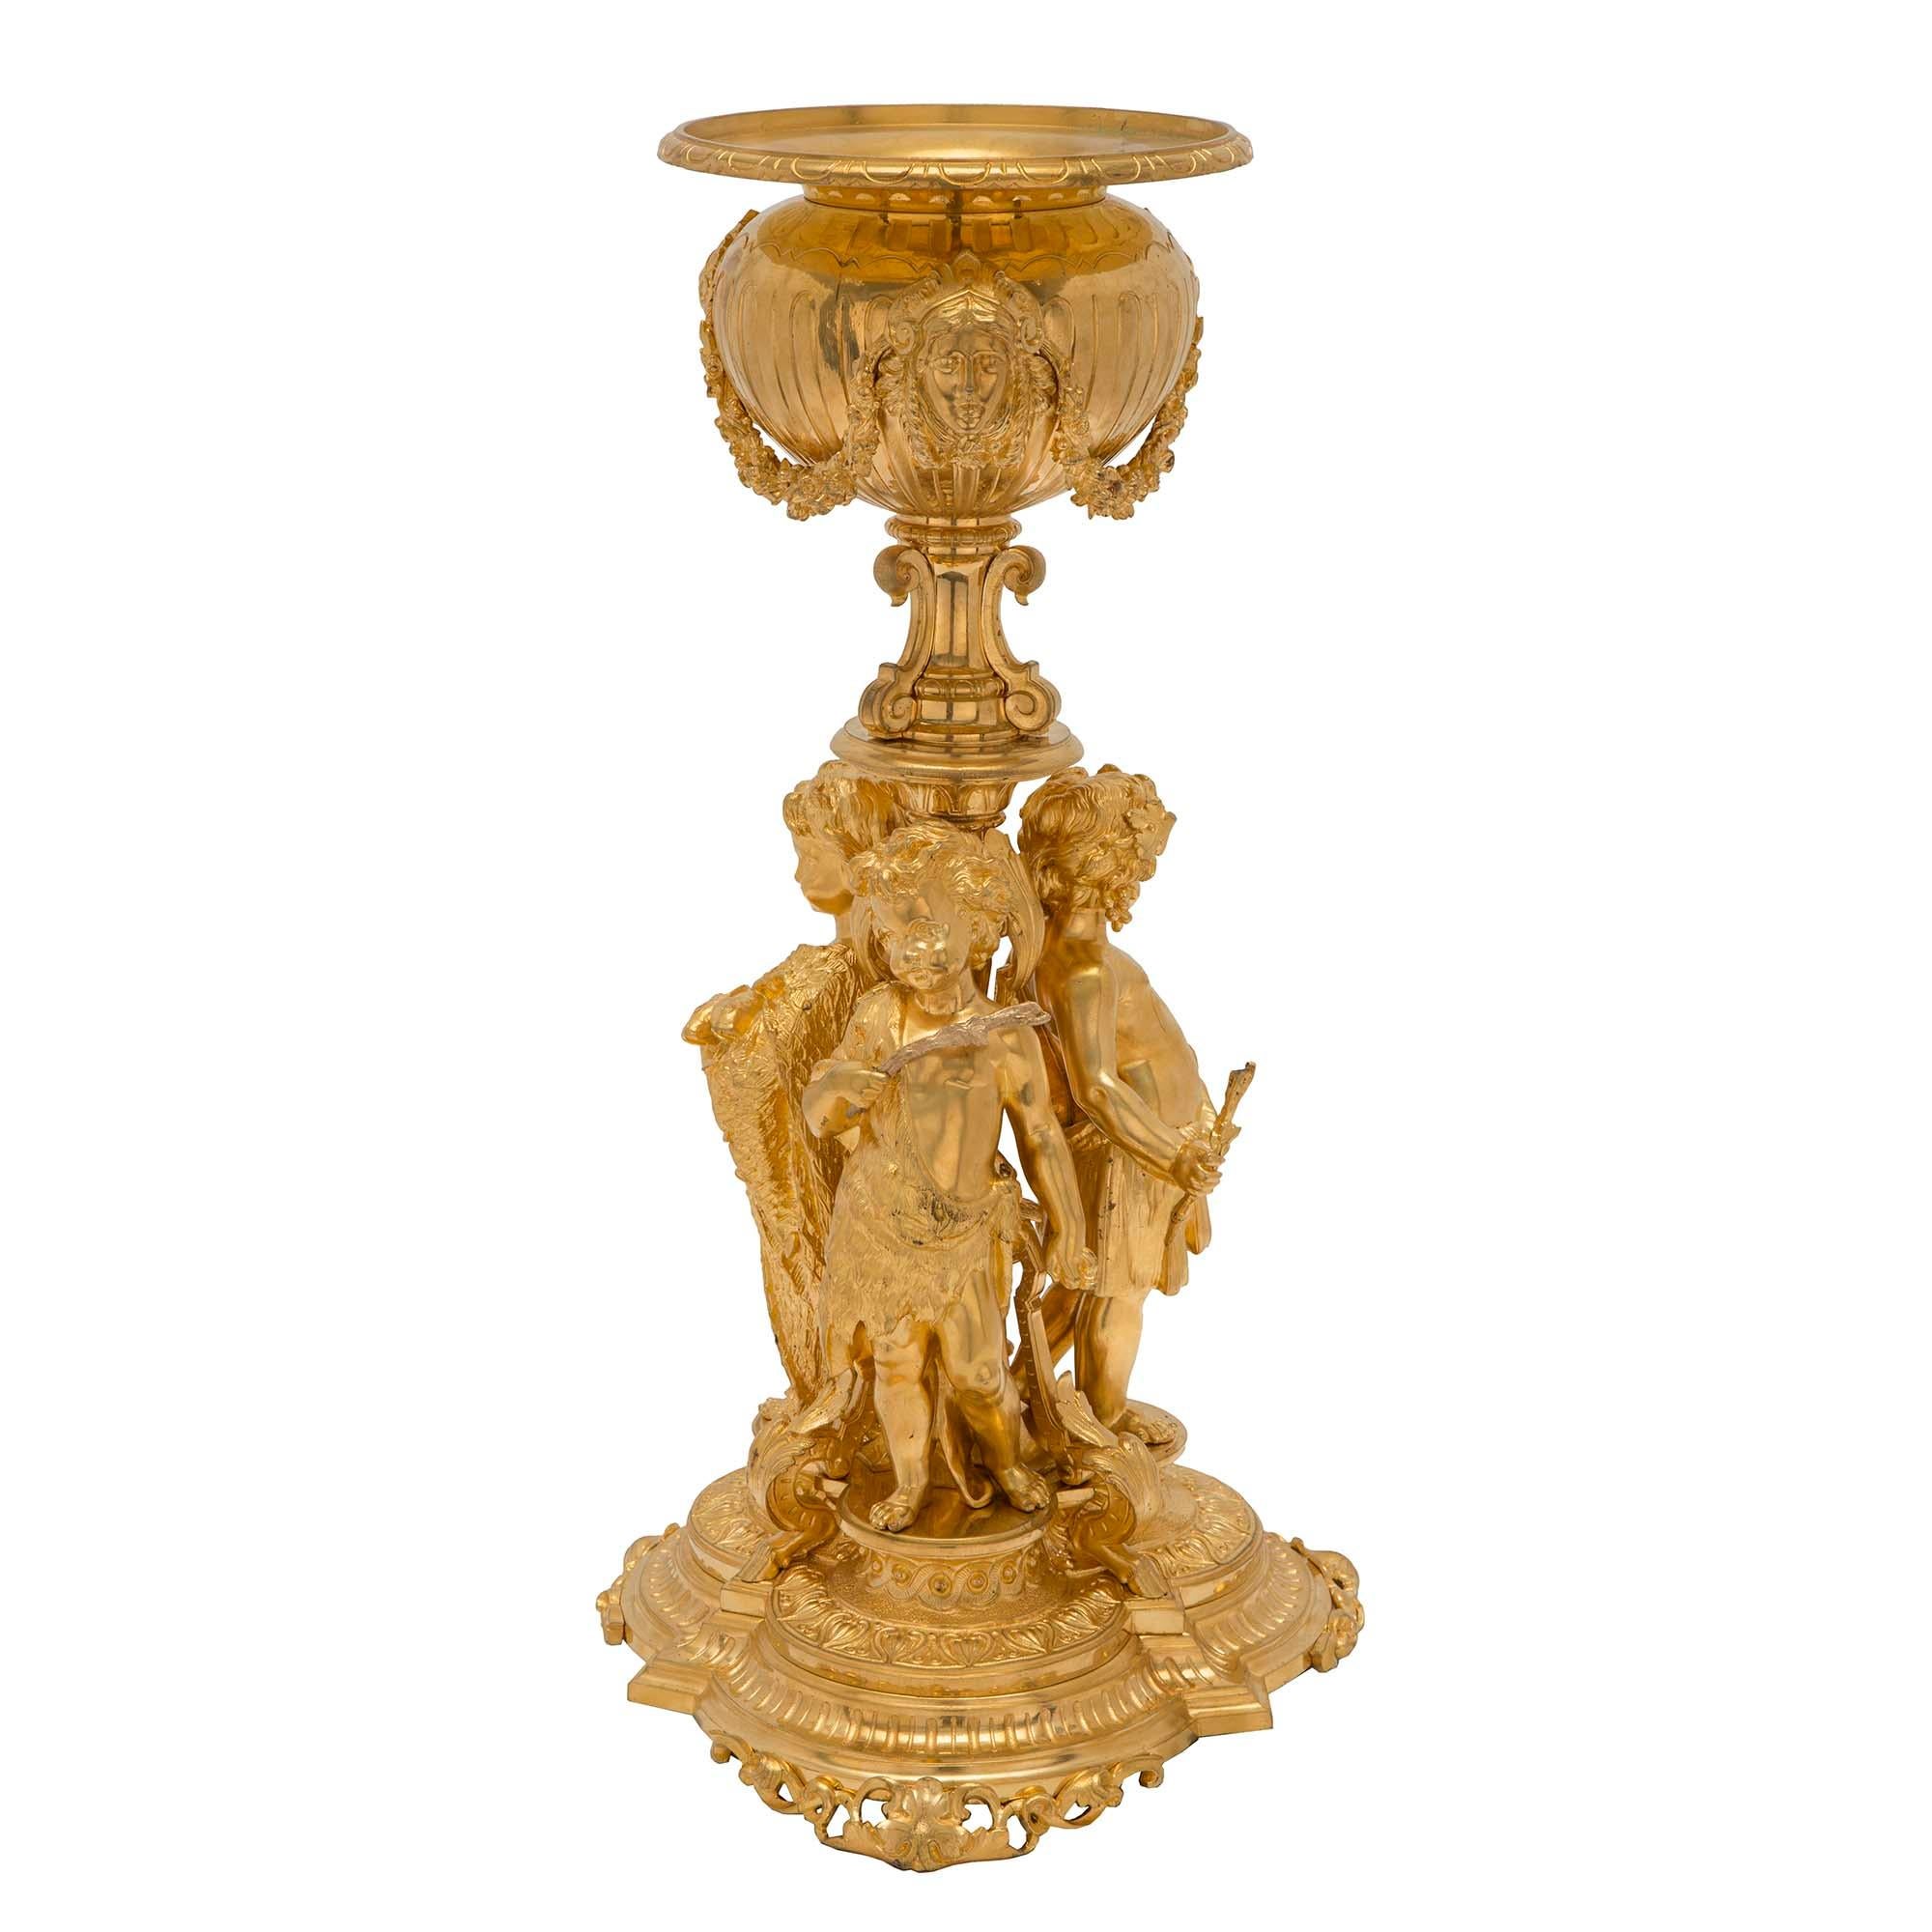 French 19th Century Louis XVI Style Ormolu Urn In Good Condition For Sale In West Palm Beach, FL